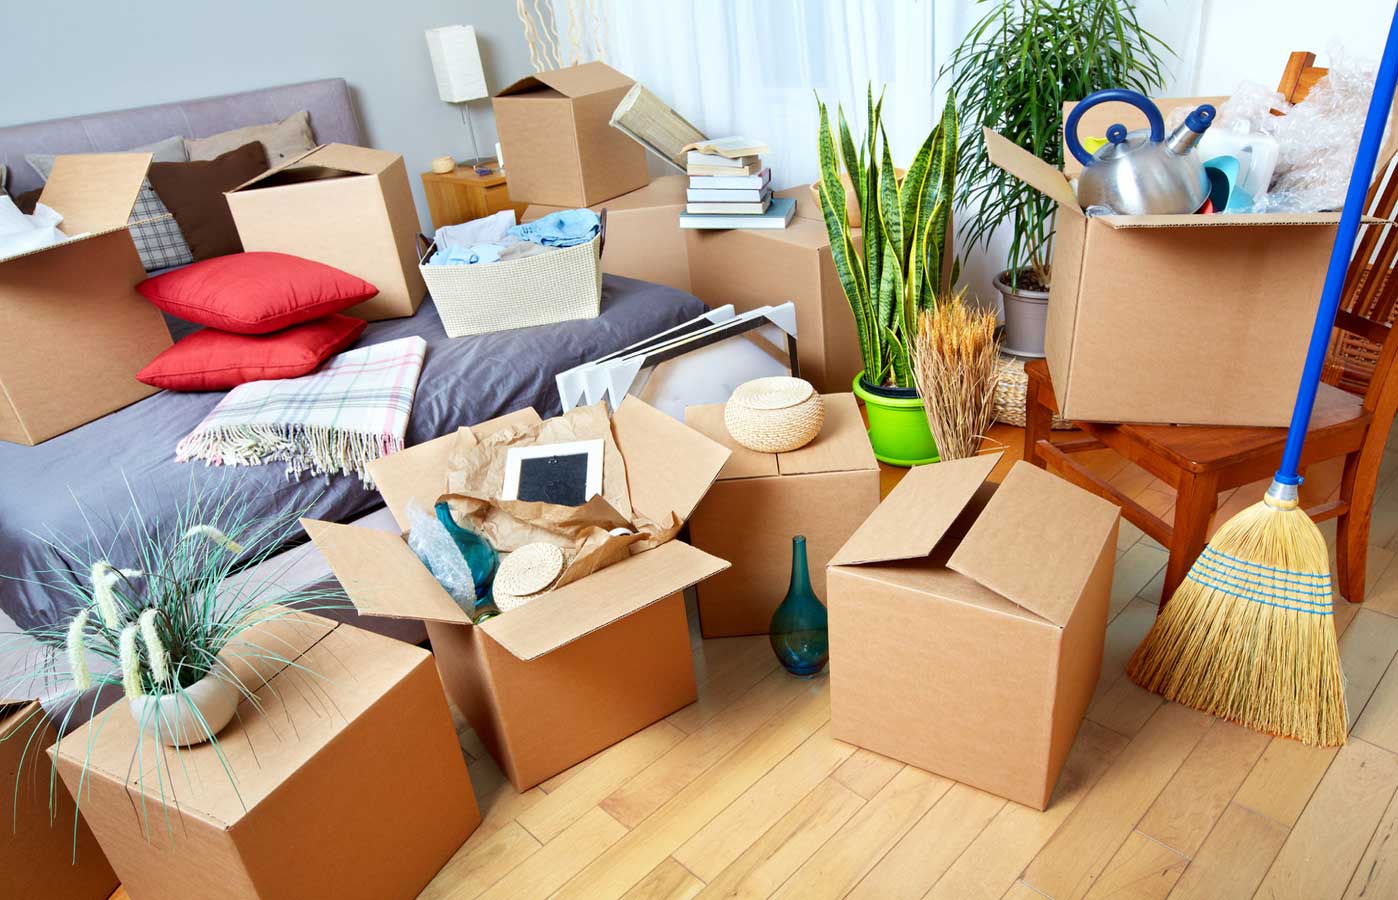 How to Effectively Unpack